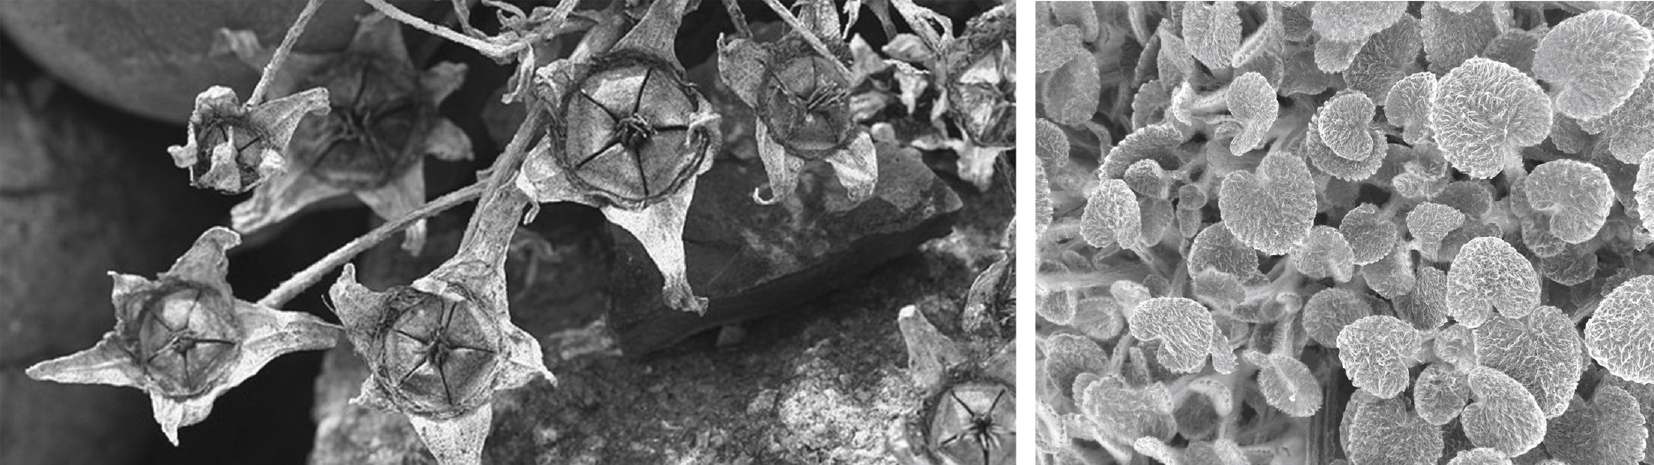 The image on the left shows a dynamic valve mechanism in seeds of many Mesembryanthemums as a behavioural adaptation, using rainwater as a trigger to open and to launch their seeds. The image on the right shows a static strategy of hairy leaves of Gynandriris setifolia as a morphological adaptation to protect themselves against excessive sunlight and temperature, by strategies of three-dimensional waxes or dense coverage with air-filled hairs.